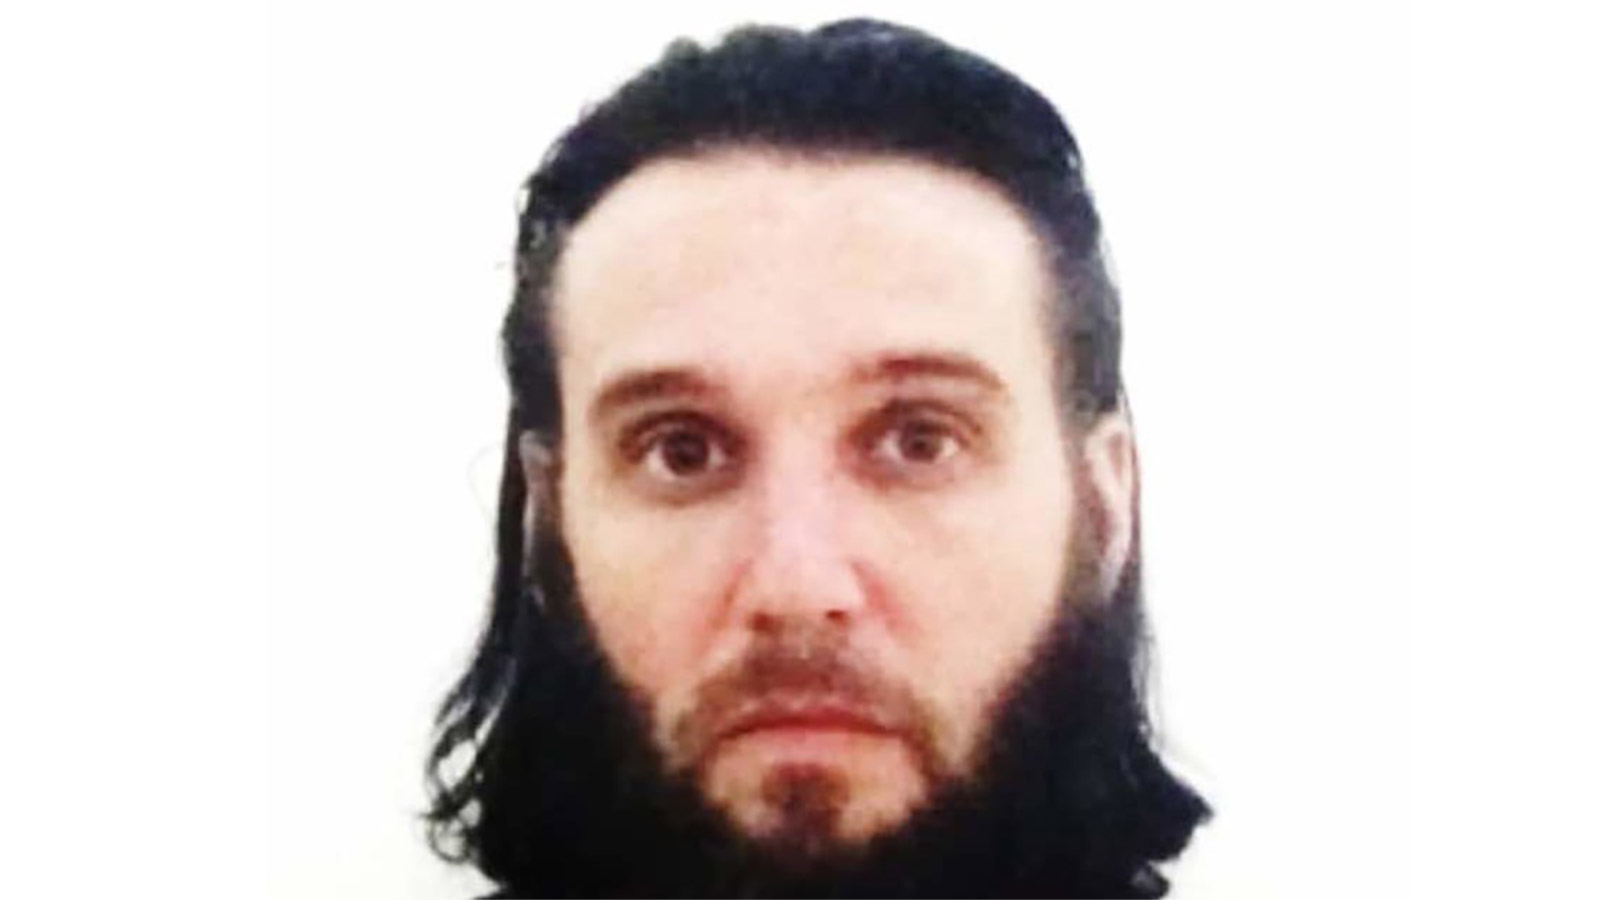 French ISIS fighter Adrien Guihal